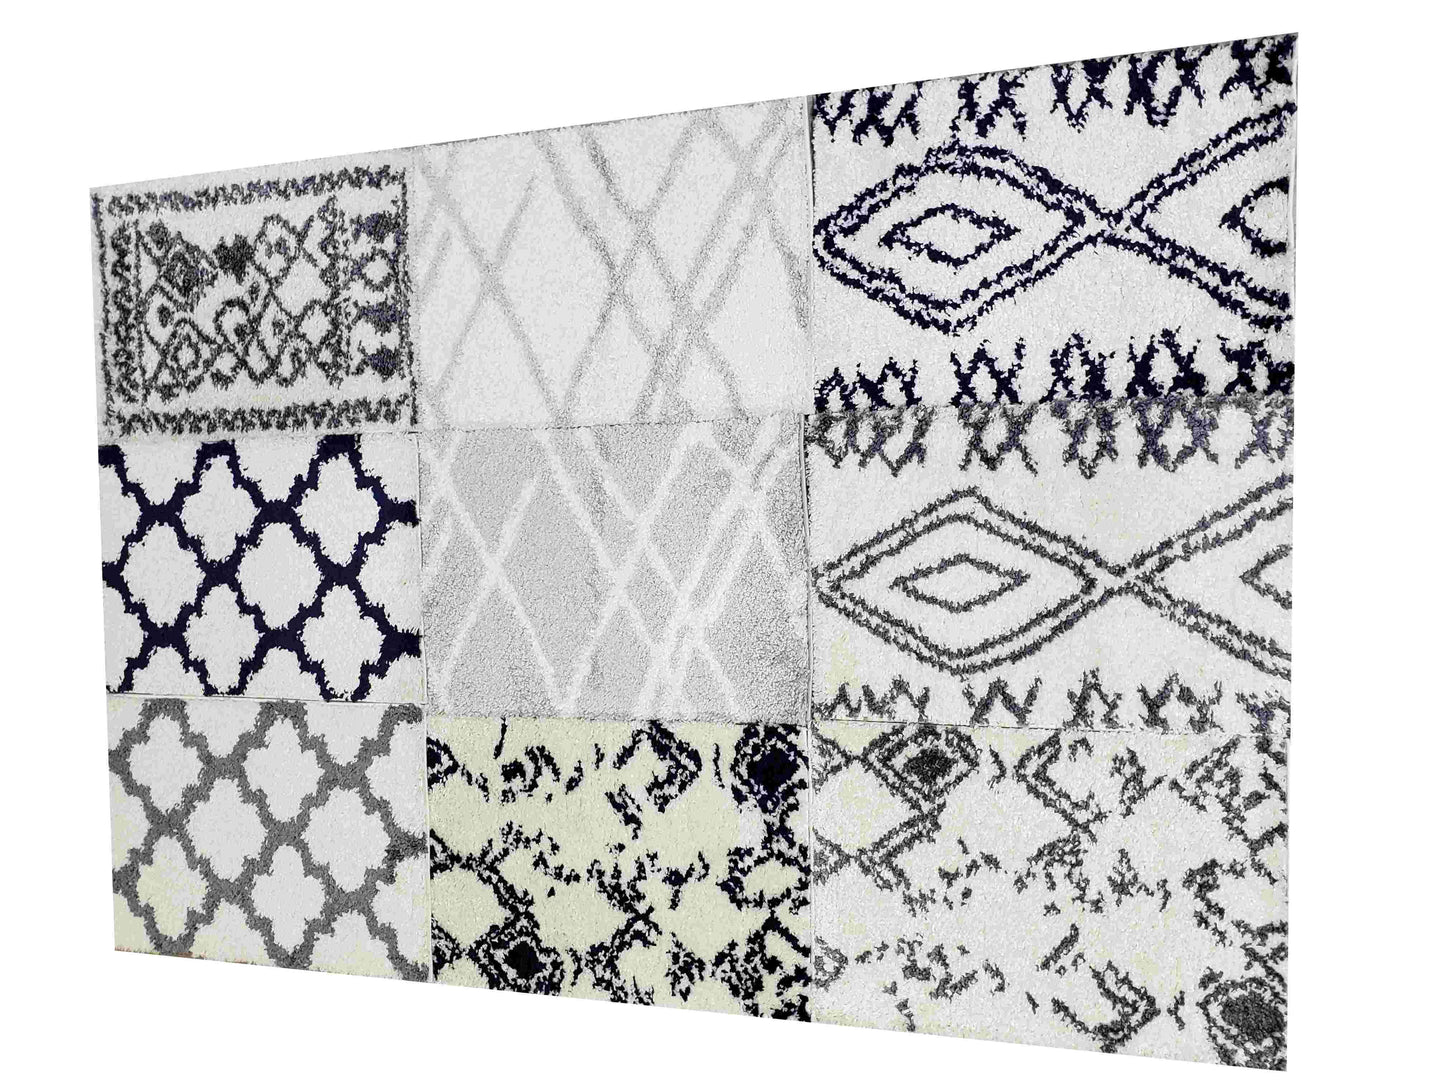 ladole rugs grant shaggy asilah abstract modern abstract turkish indoor small mat doormat rug in dark gray white 110 x 211 57cm x 90cm 5x7, 5x8 ft Contemporary, Living Room Carpet, Bedroom, Home Office